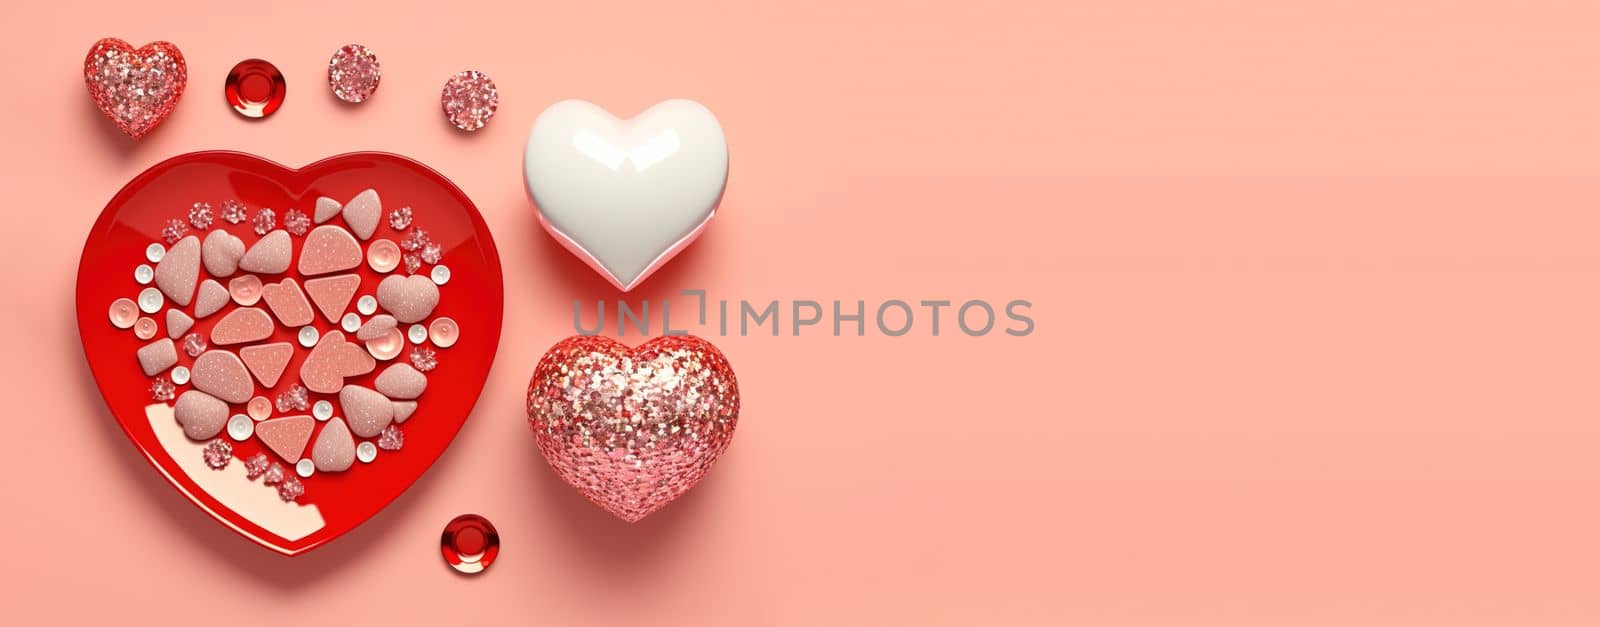 Gleaming 3D Heart, Diamond, and Crystal Illustration for Valentine's Day Banner